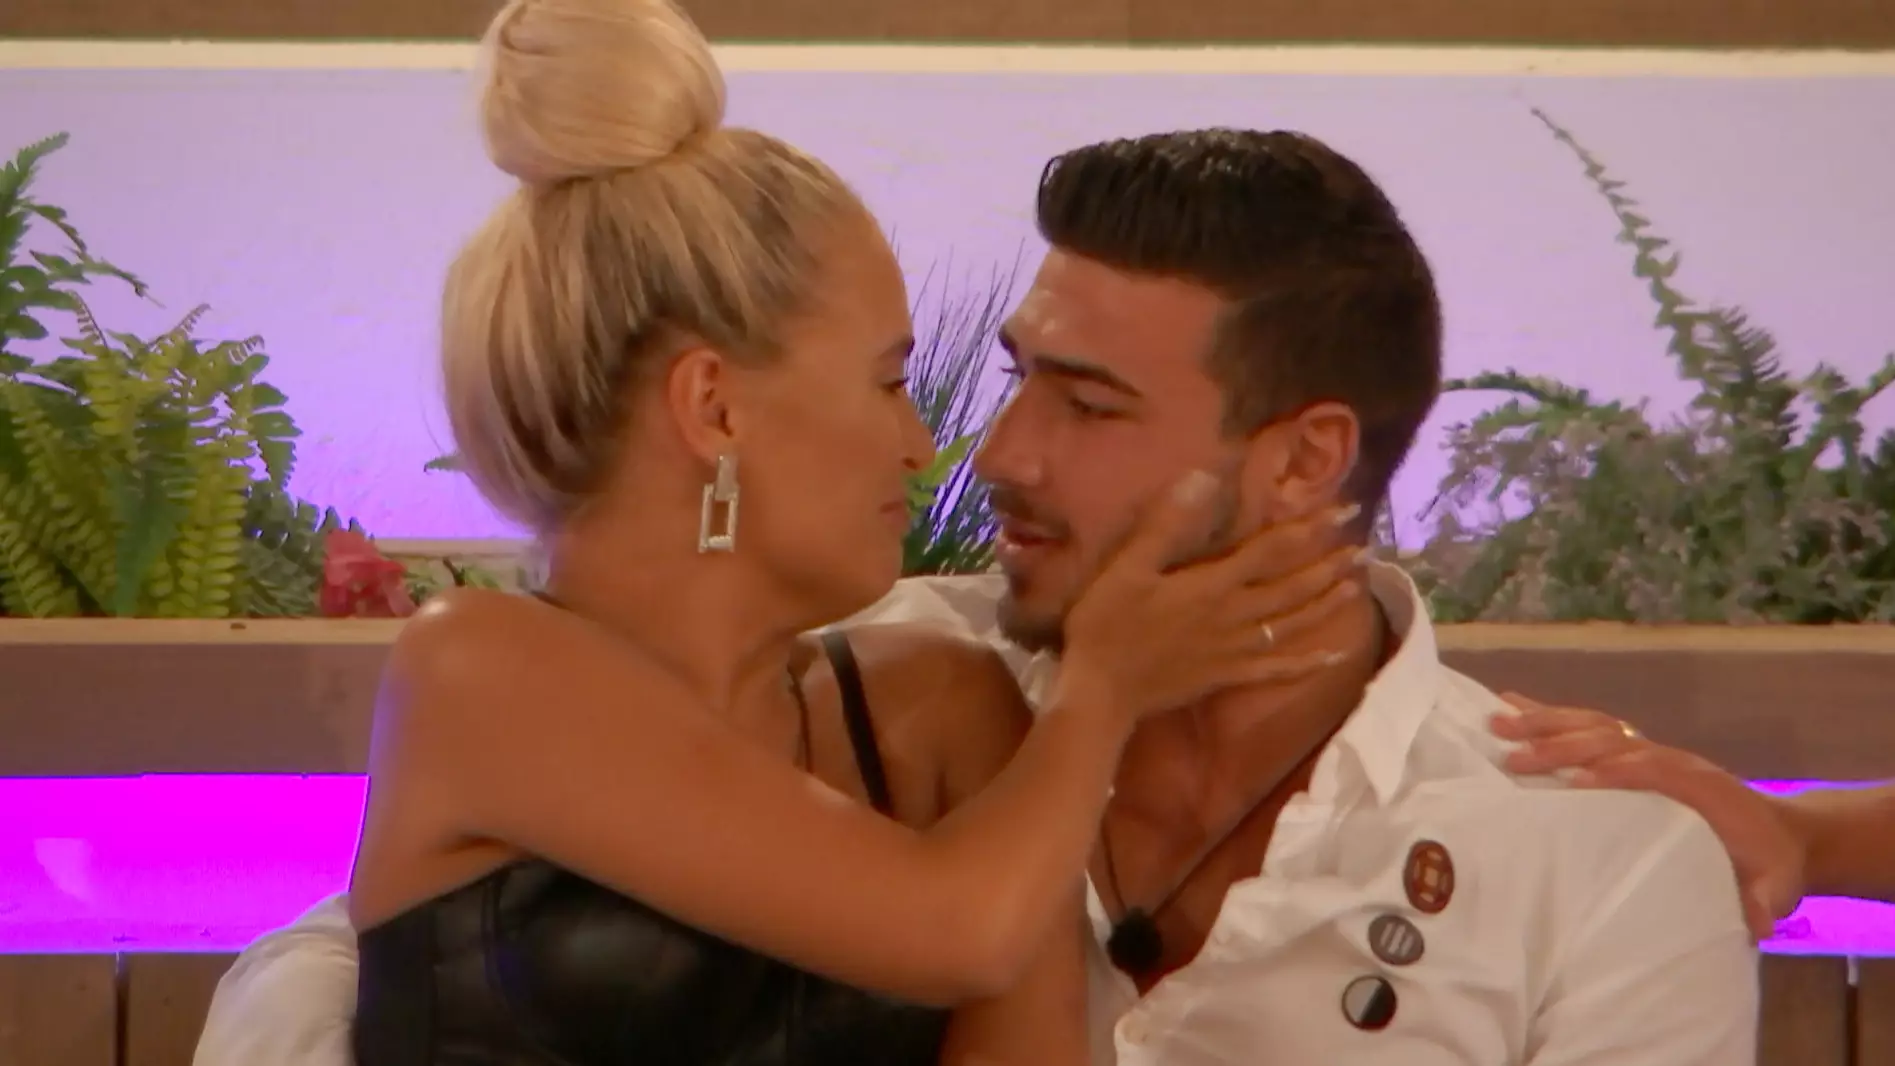 'Love Island' Fans Are Convinced That Tommy Fury and Molly-Mae Hague Have Already Broken Up